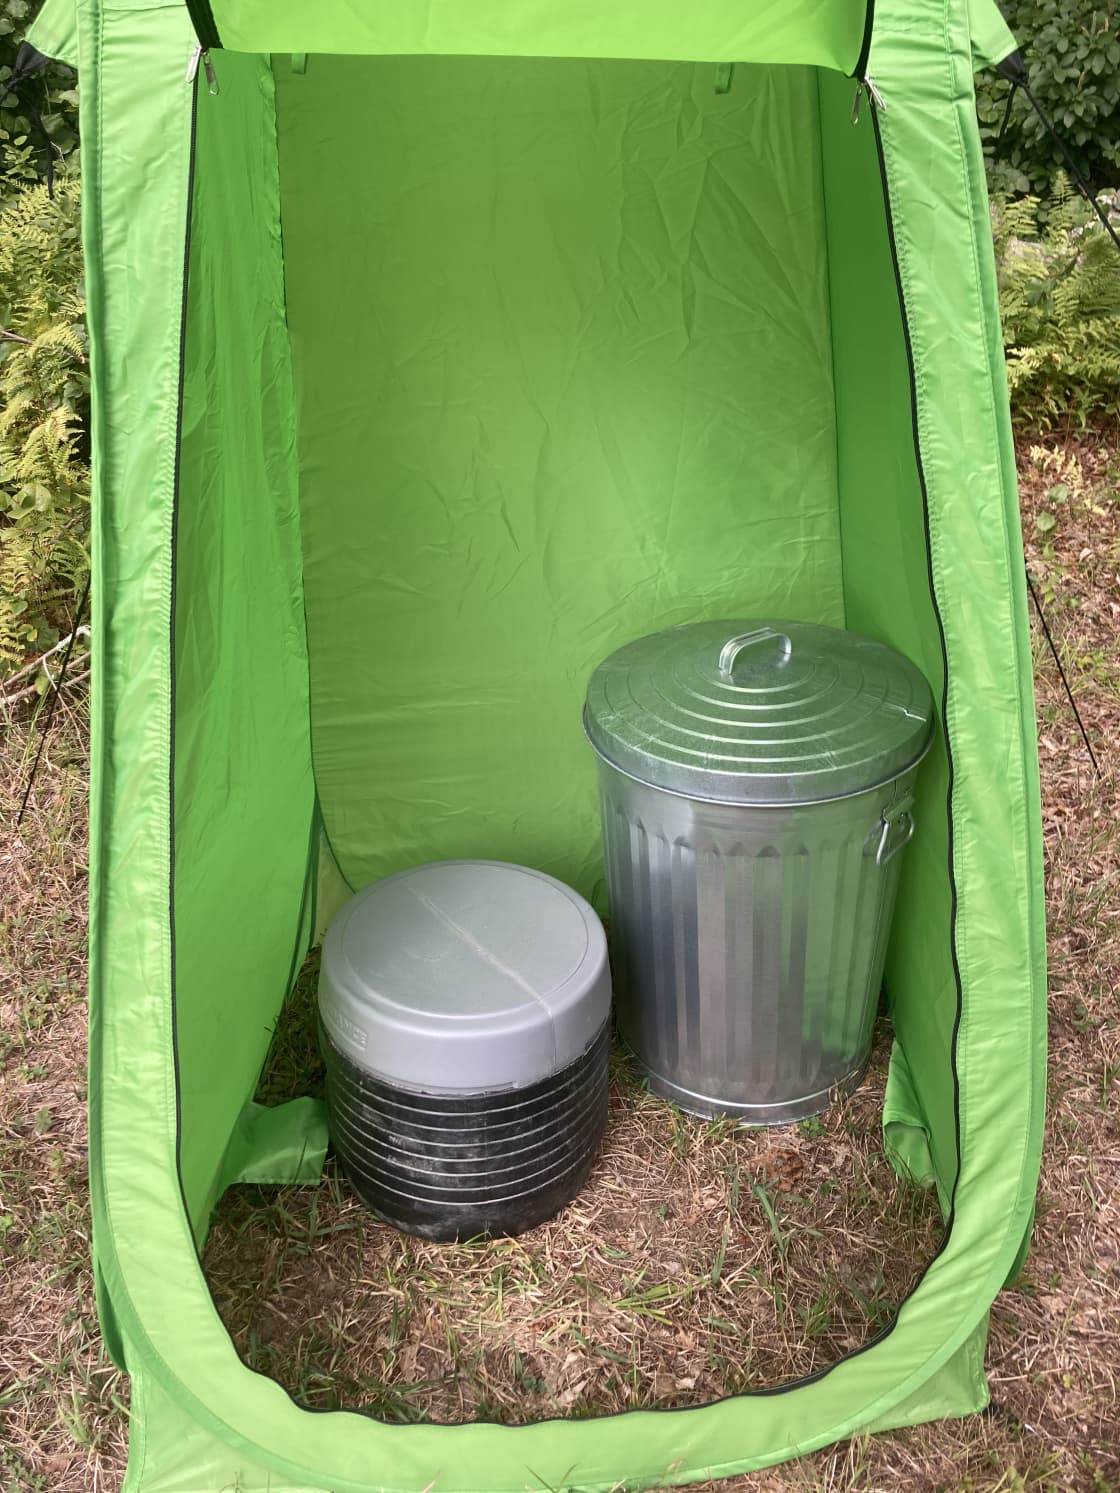 Camp toilet lined with a bag. You must take it with you if you use it! Cedar shavings are provided in the trash can